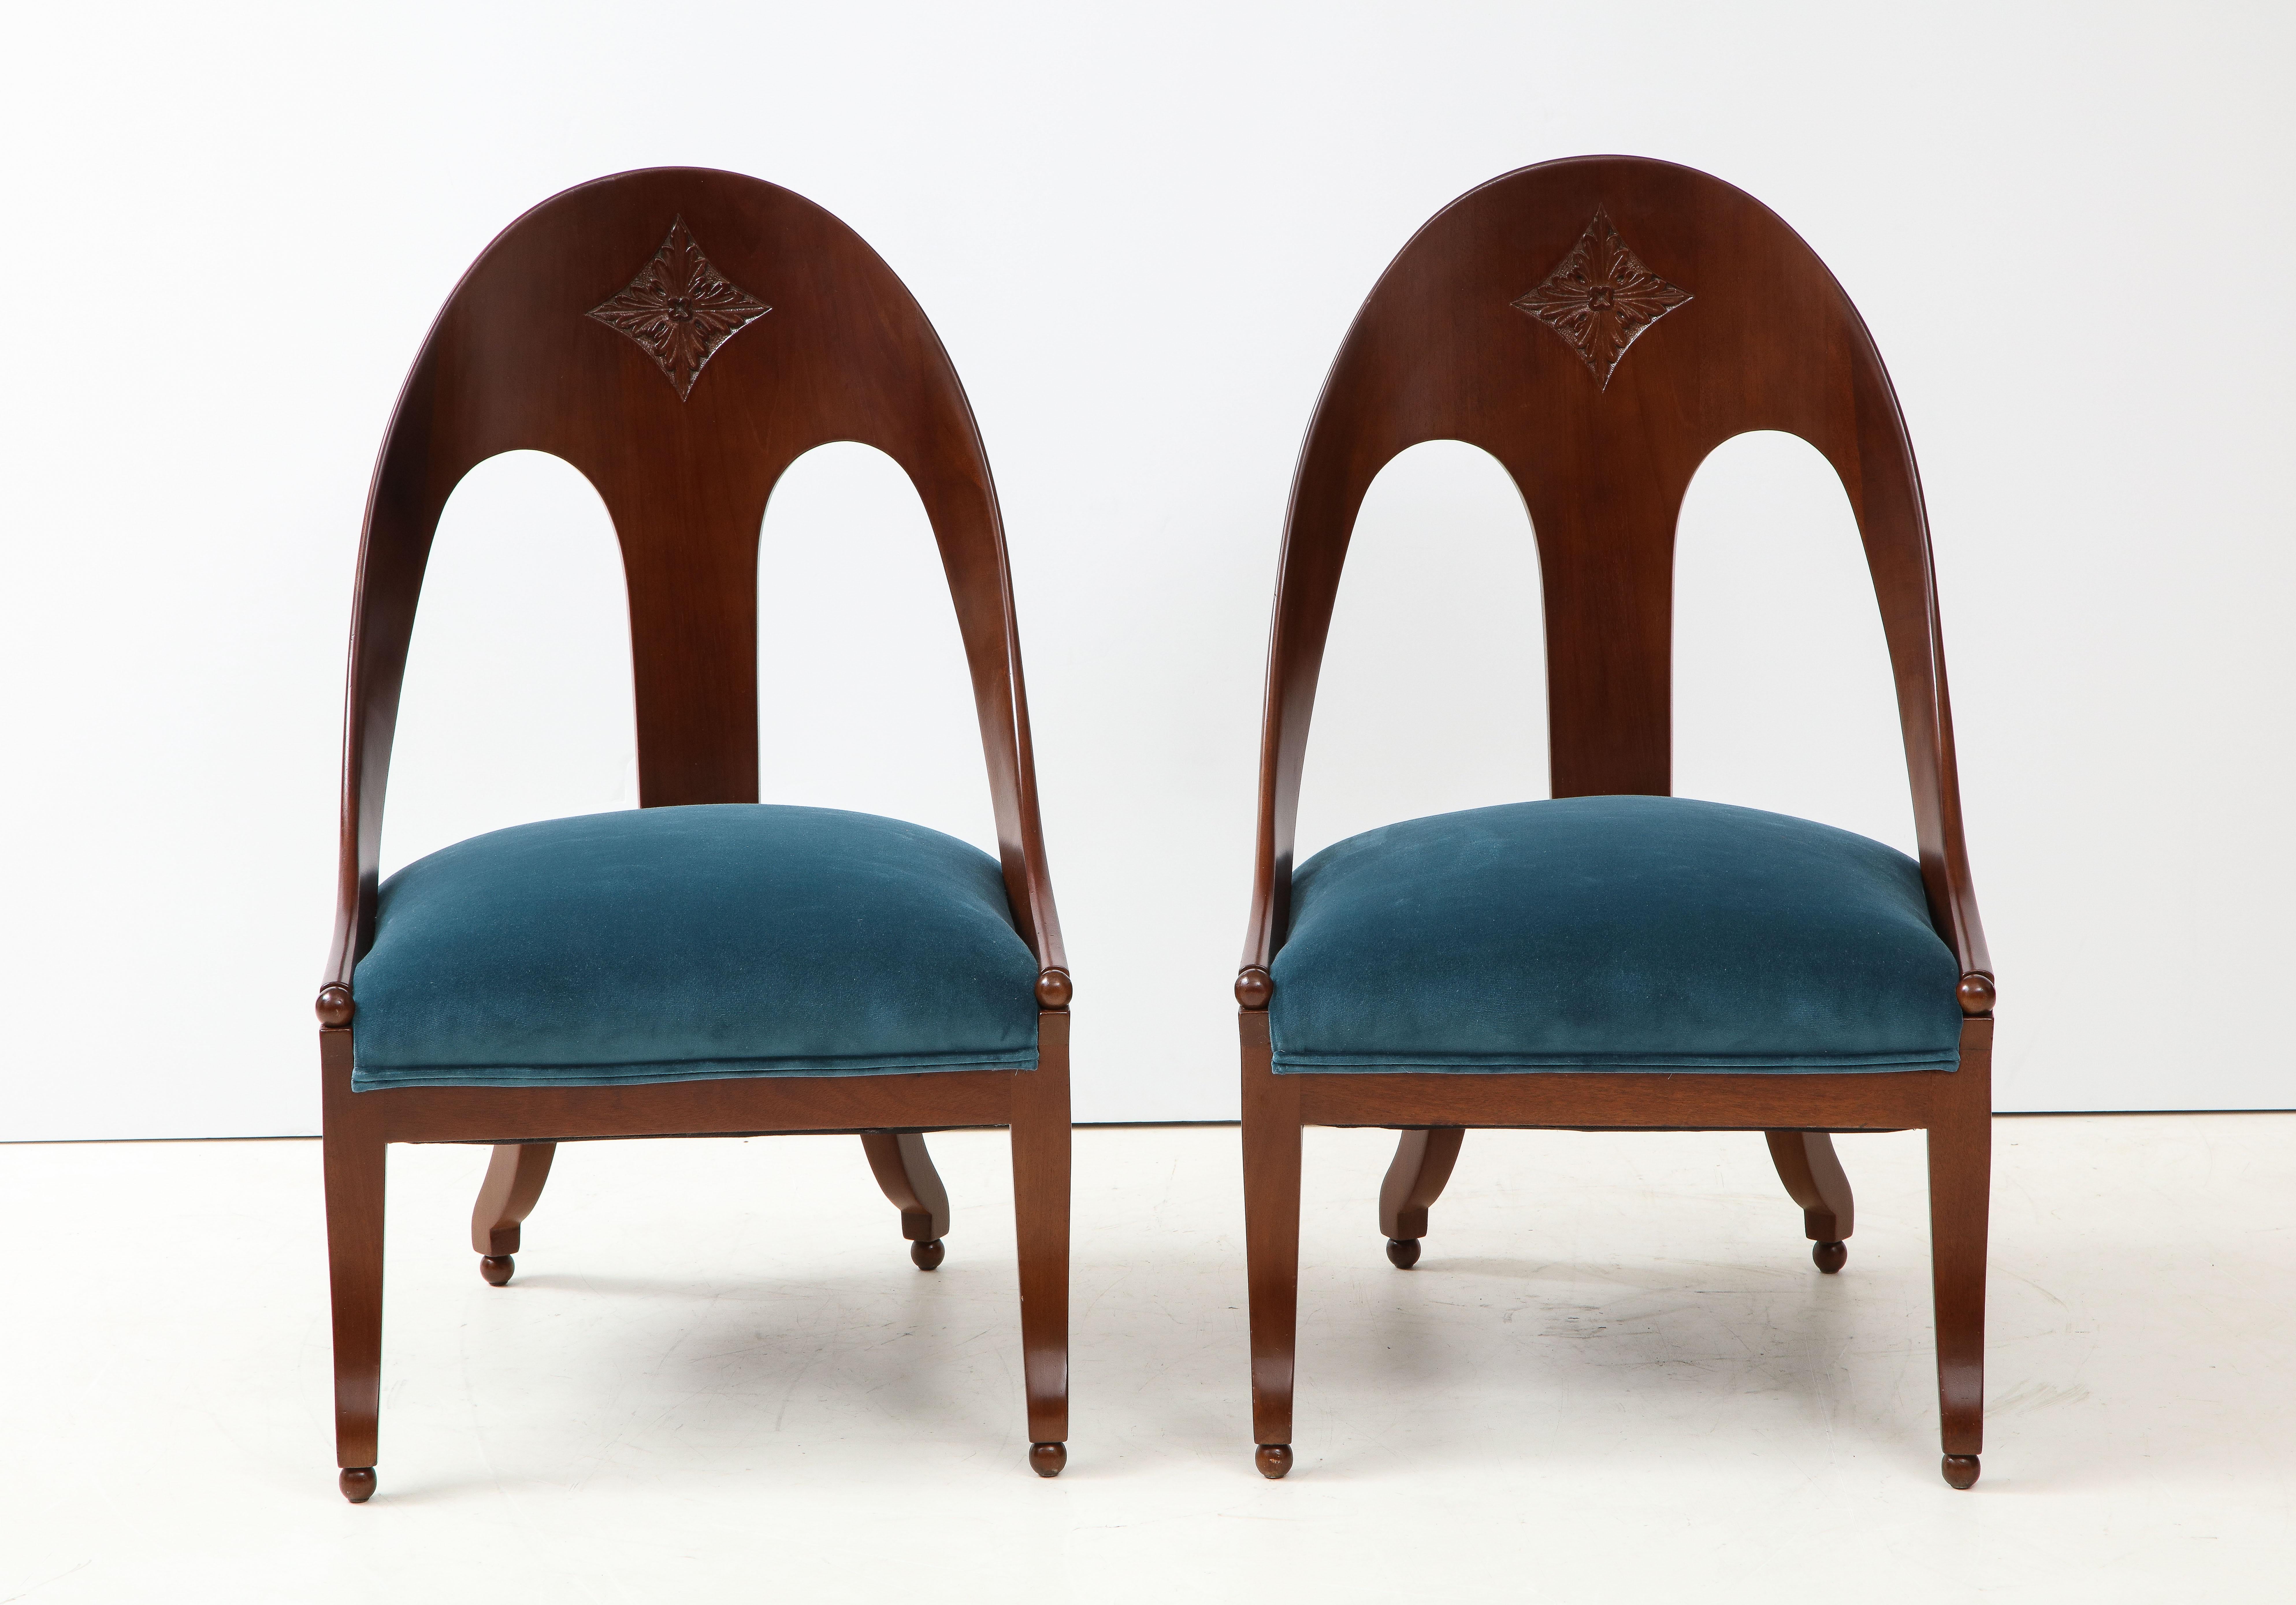 1950s Michael Taylor designed for Baker spoon back slipper chairs, newly re-upholstered in velvet lightly restored with minor wear to the wood.